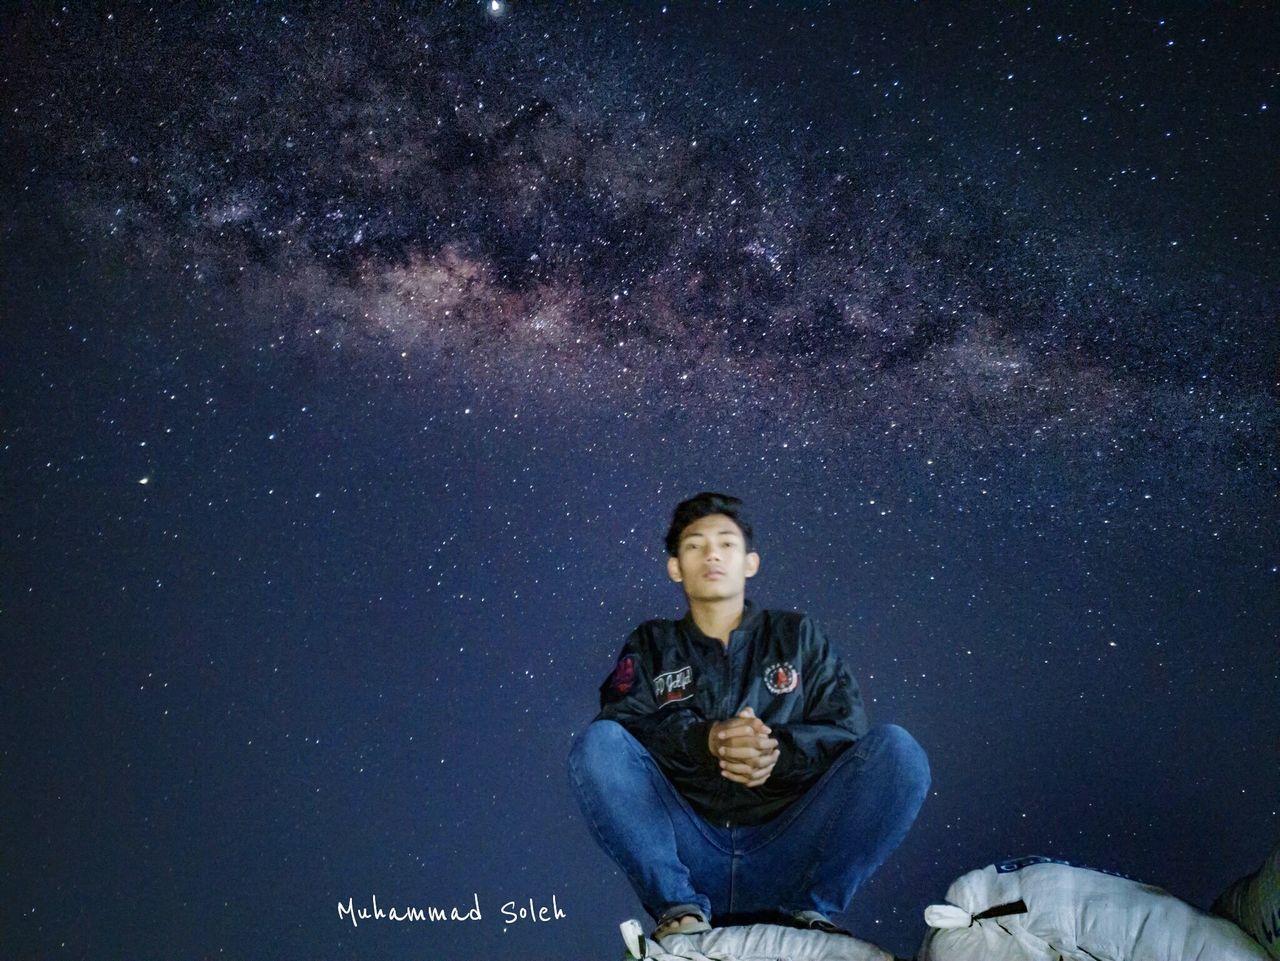 star - space, space, astronomy, night, one person, galaxy, sitting, young adult, sky, young men, infinity, nature, milky way, full length, leisure activity, casual clothing, constellation, outdoors, adult